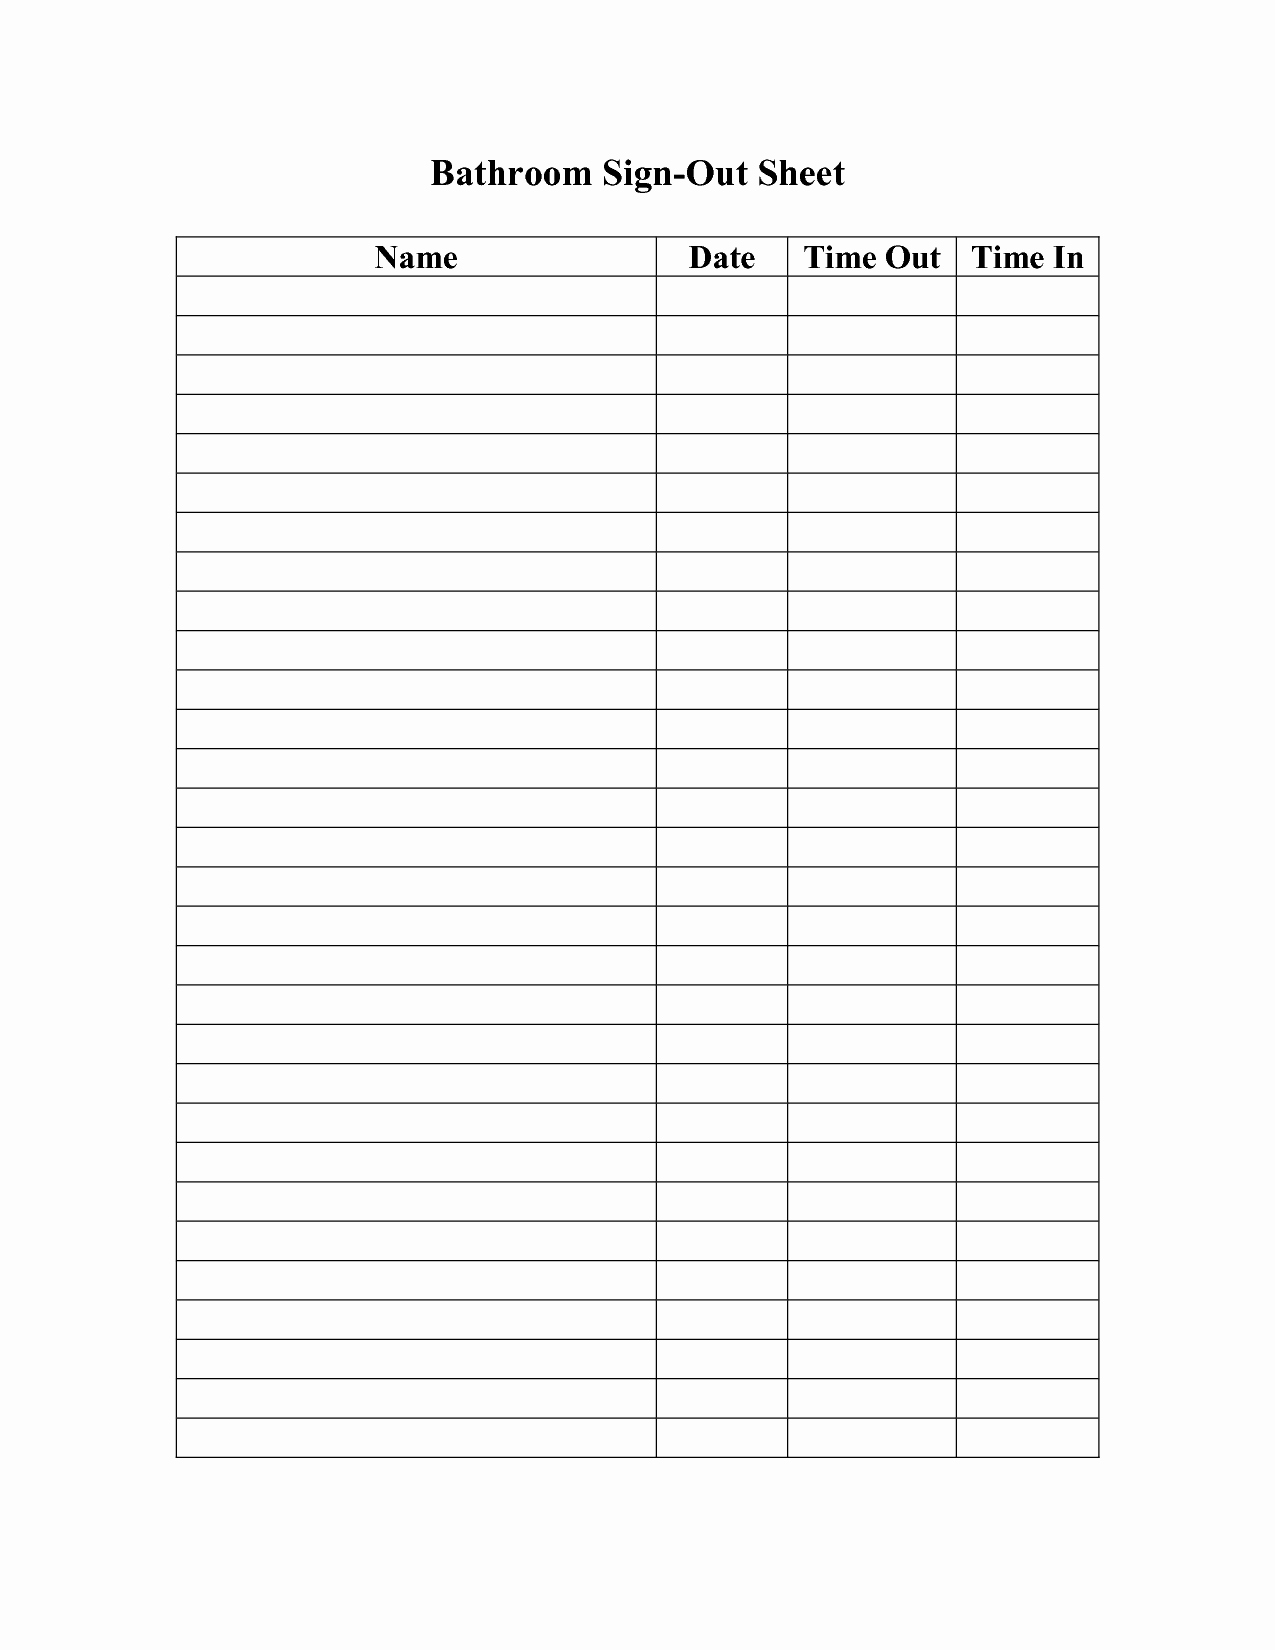 Restroom Cleaning Log Template Fresh 6 Best Of Bathroom Sign Out Sheet Printable